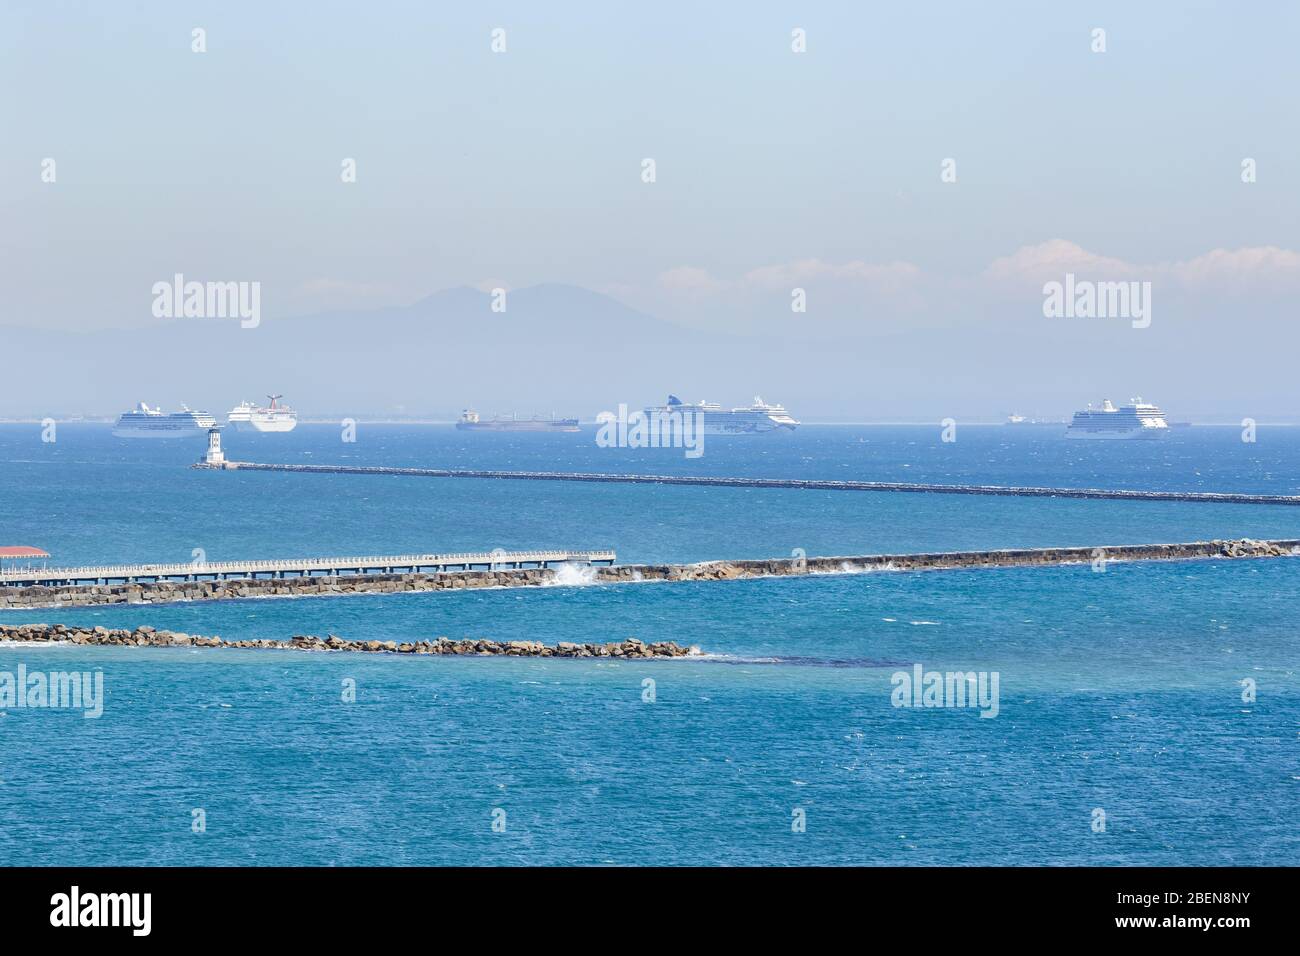 San Pedro, CA - Cruise ships wait with no place to go during Covid-19 crisis April 14, 2020 Stock Photo